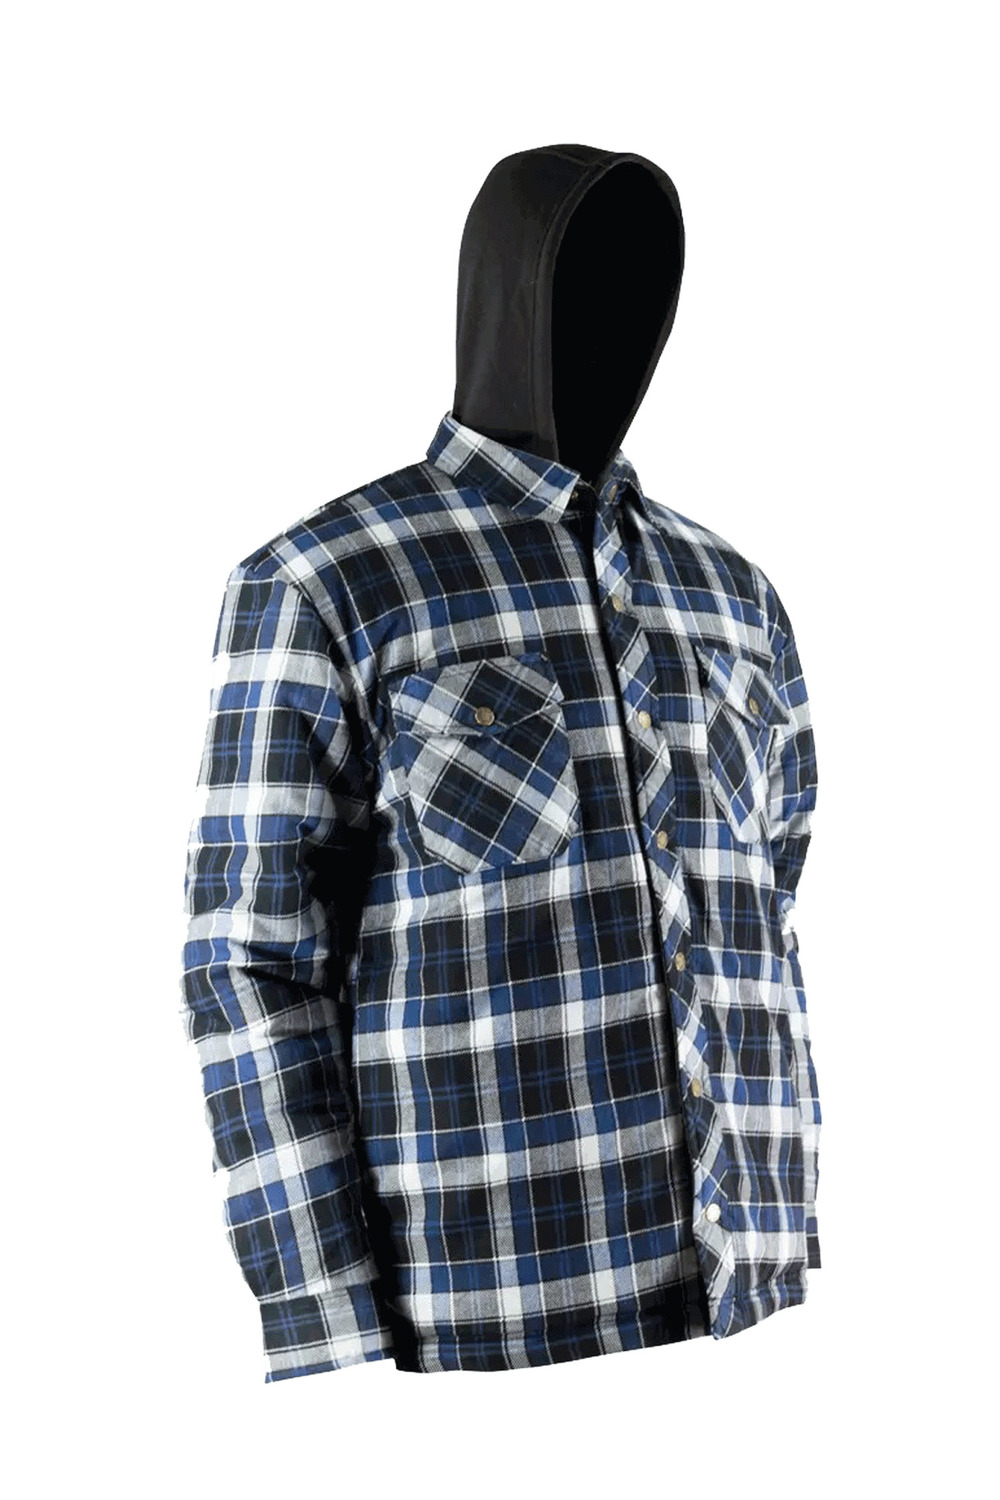 Jackfield - Quilted flannel shirt with with hood and rustproof snaps - Plus Size